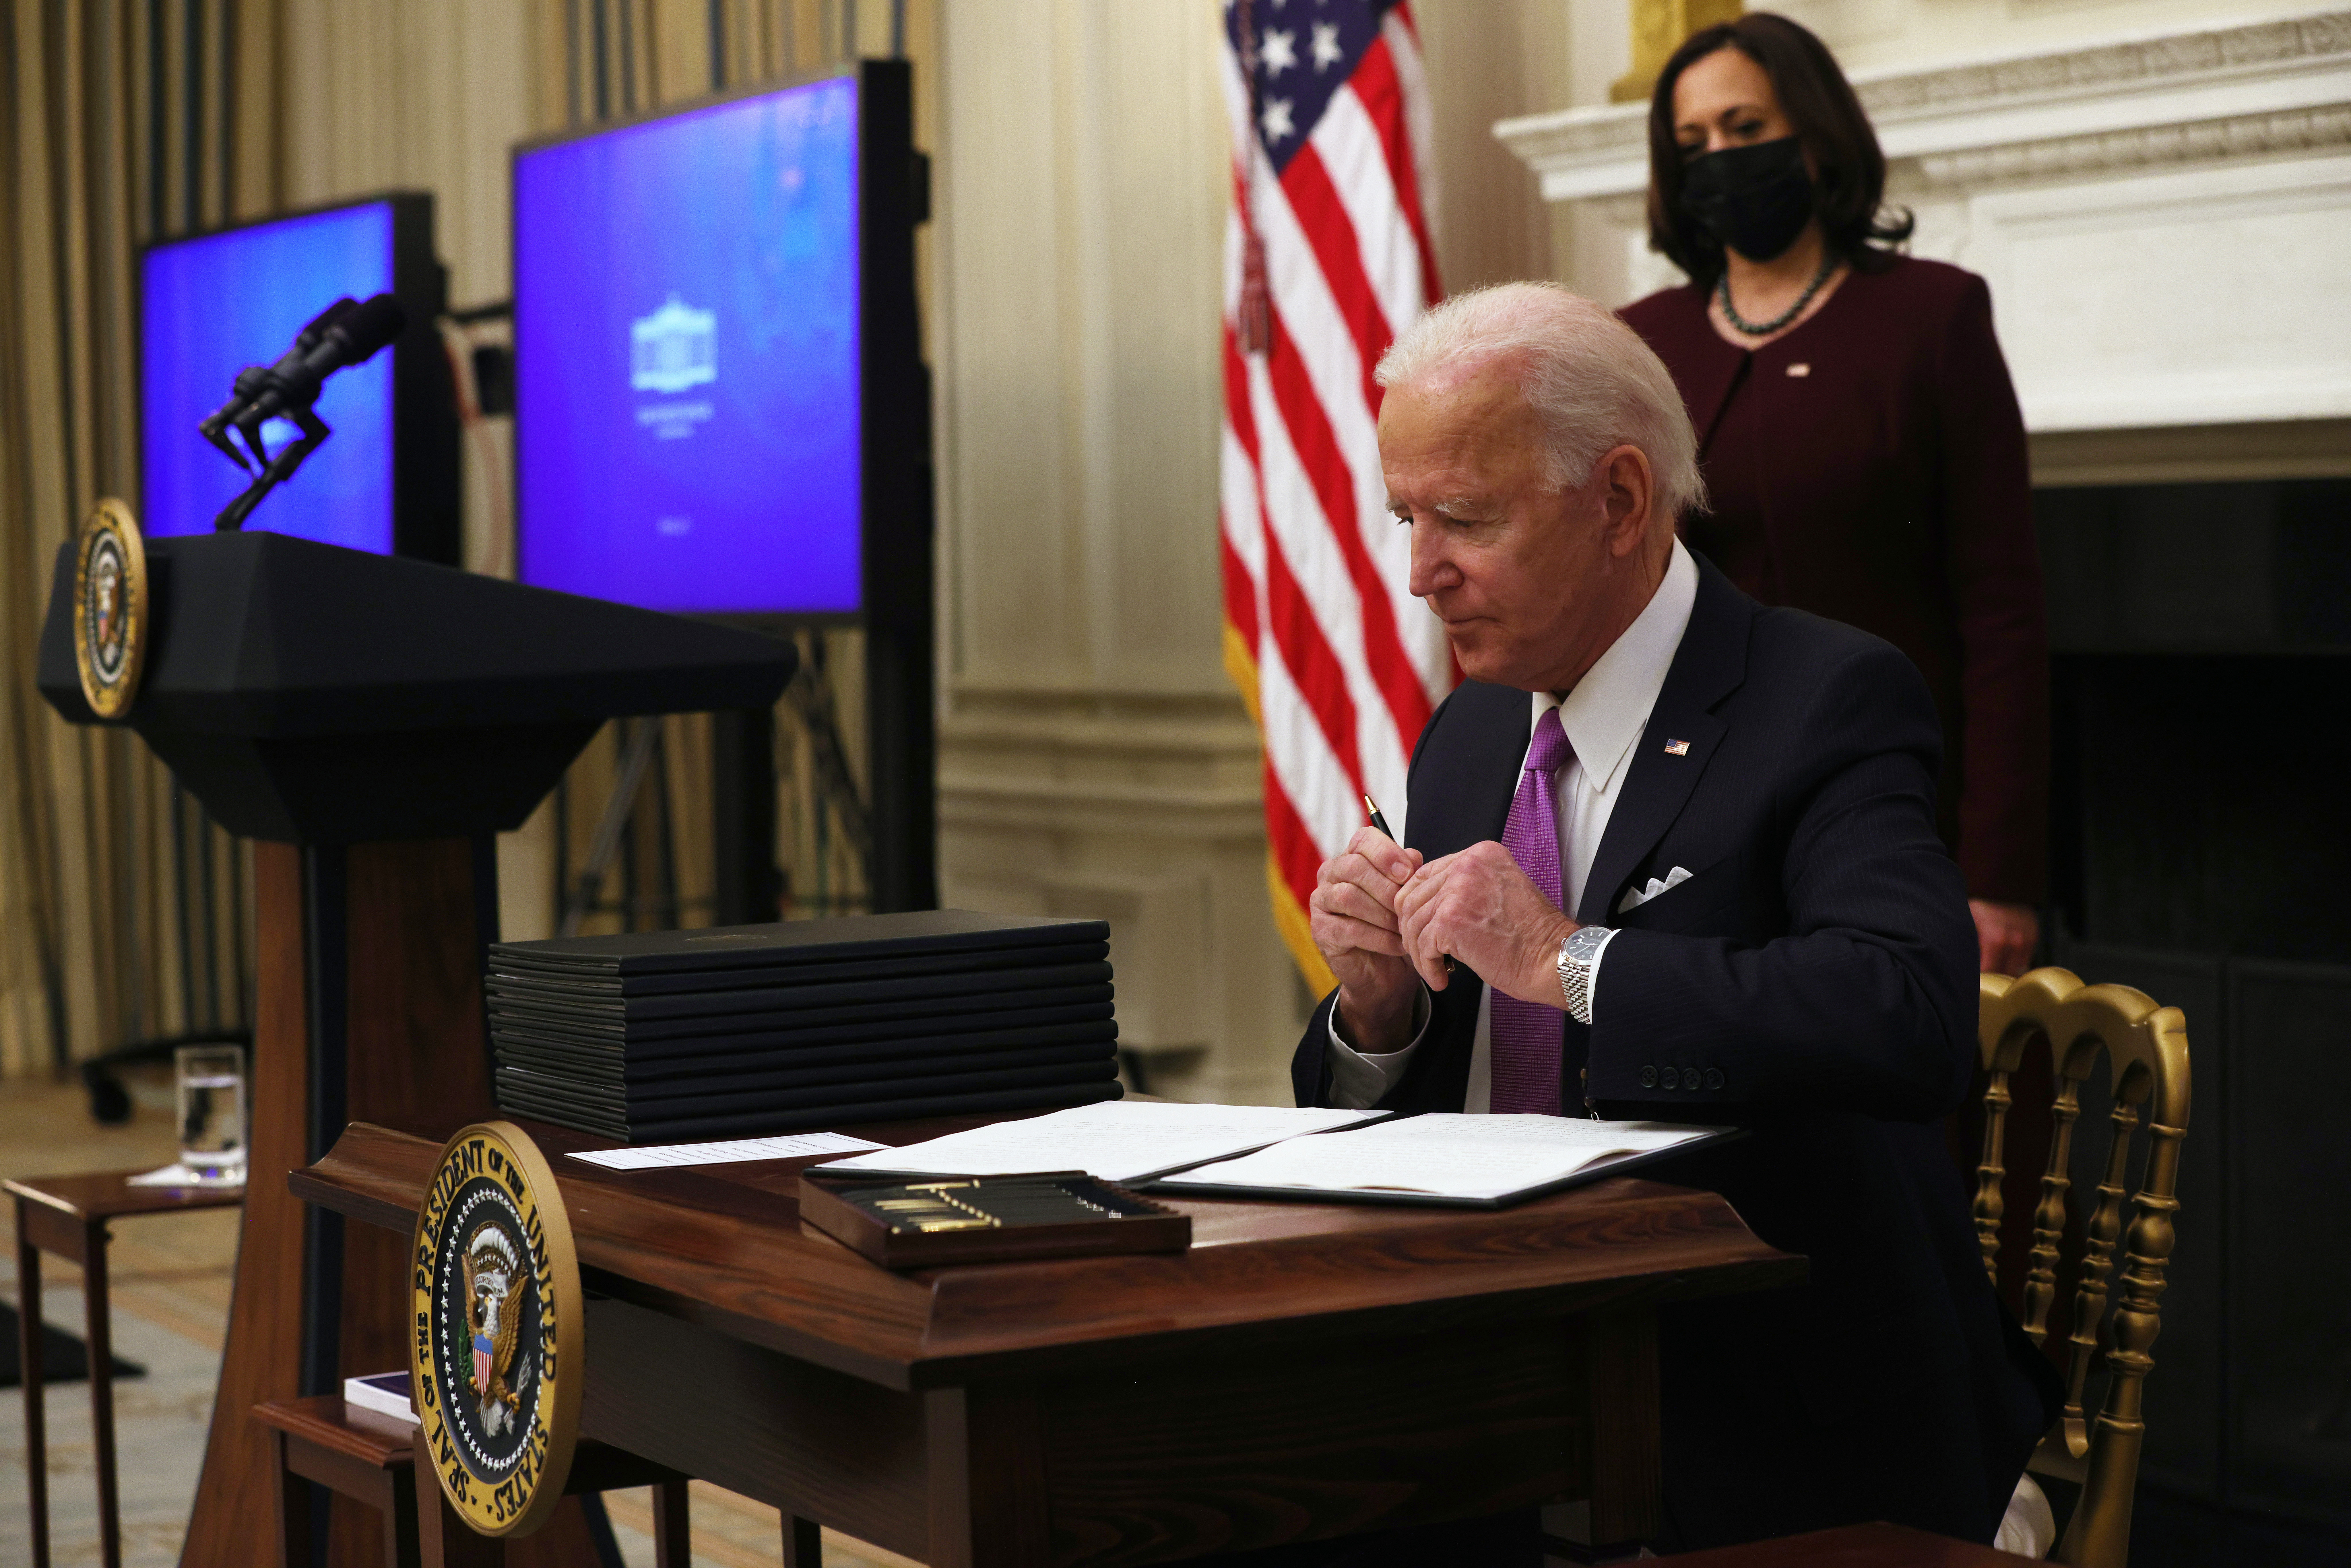 President Biden sits at a table signing documents with Vice President Kamala Harris standing behind him looking on.